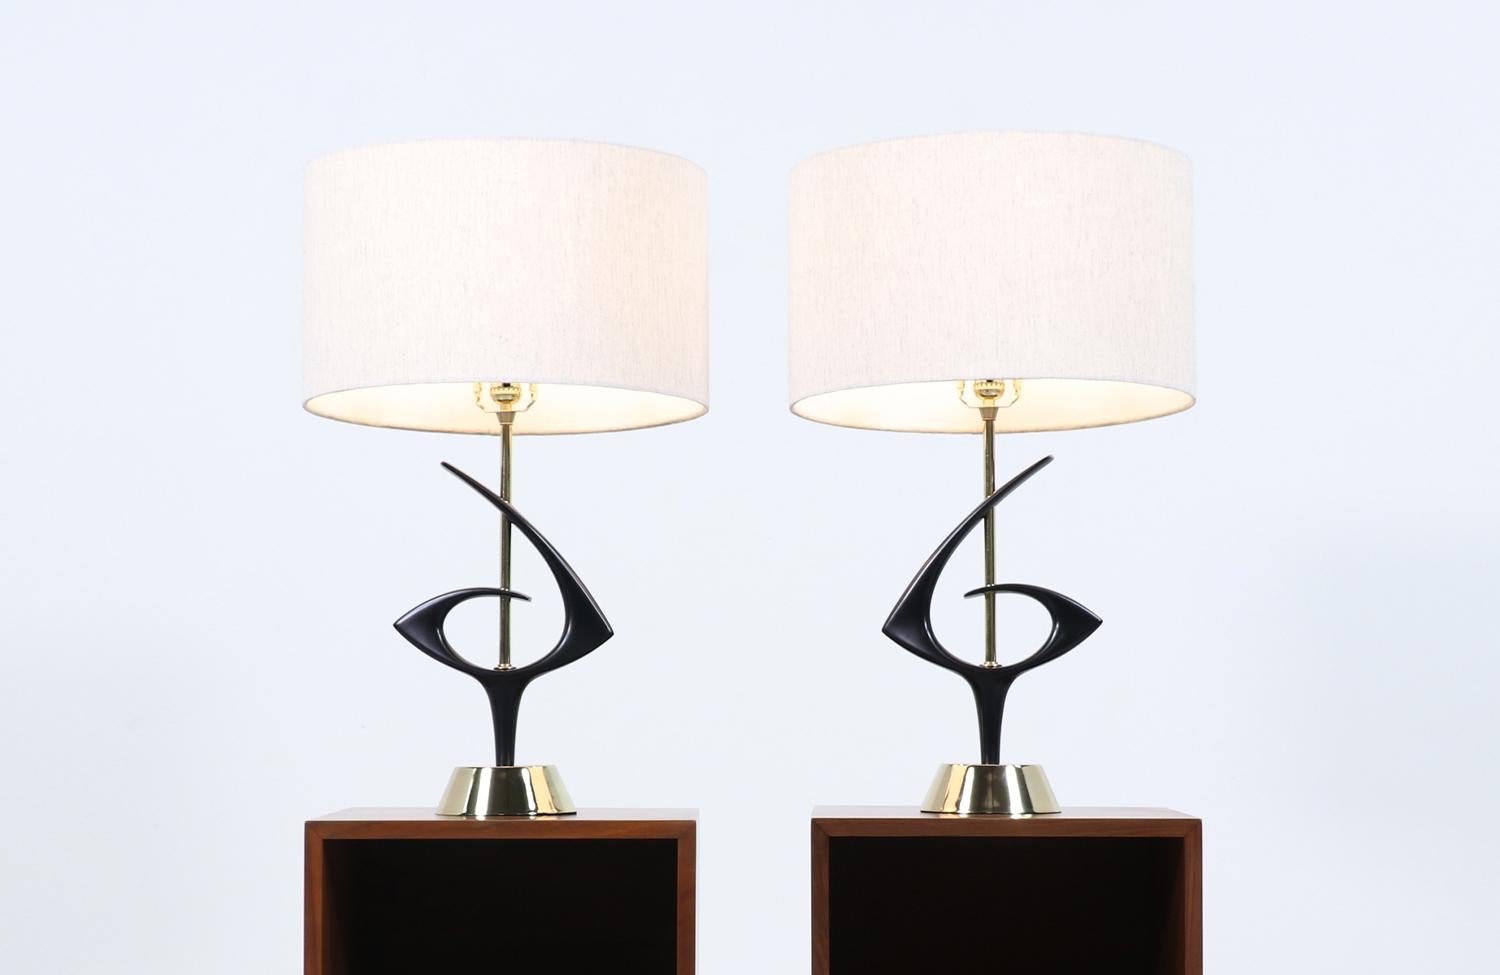 Dimensions:

27.50 in. H x 9.50 in. W x 6 in. D
Lamp Shades: 10 in. H x 17 in. W.

________________________________________

Transforming a piece of Mid-Century Modern furniture is like bringing history back to life, and we take this journey with